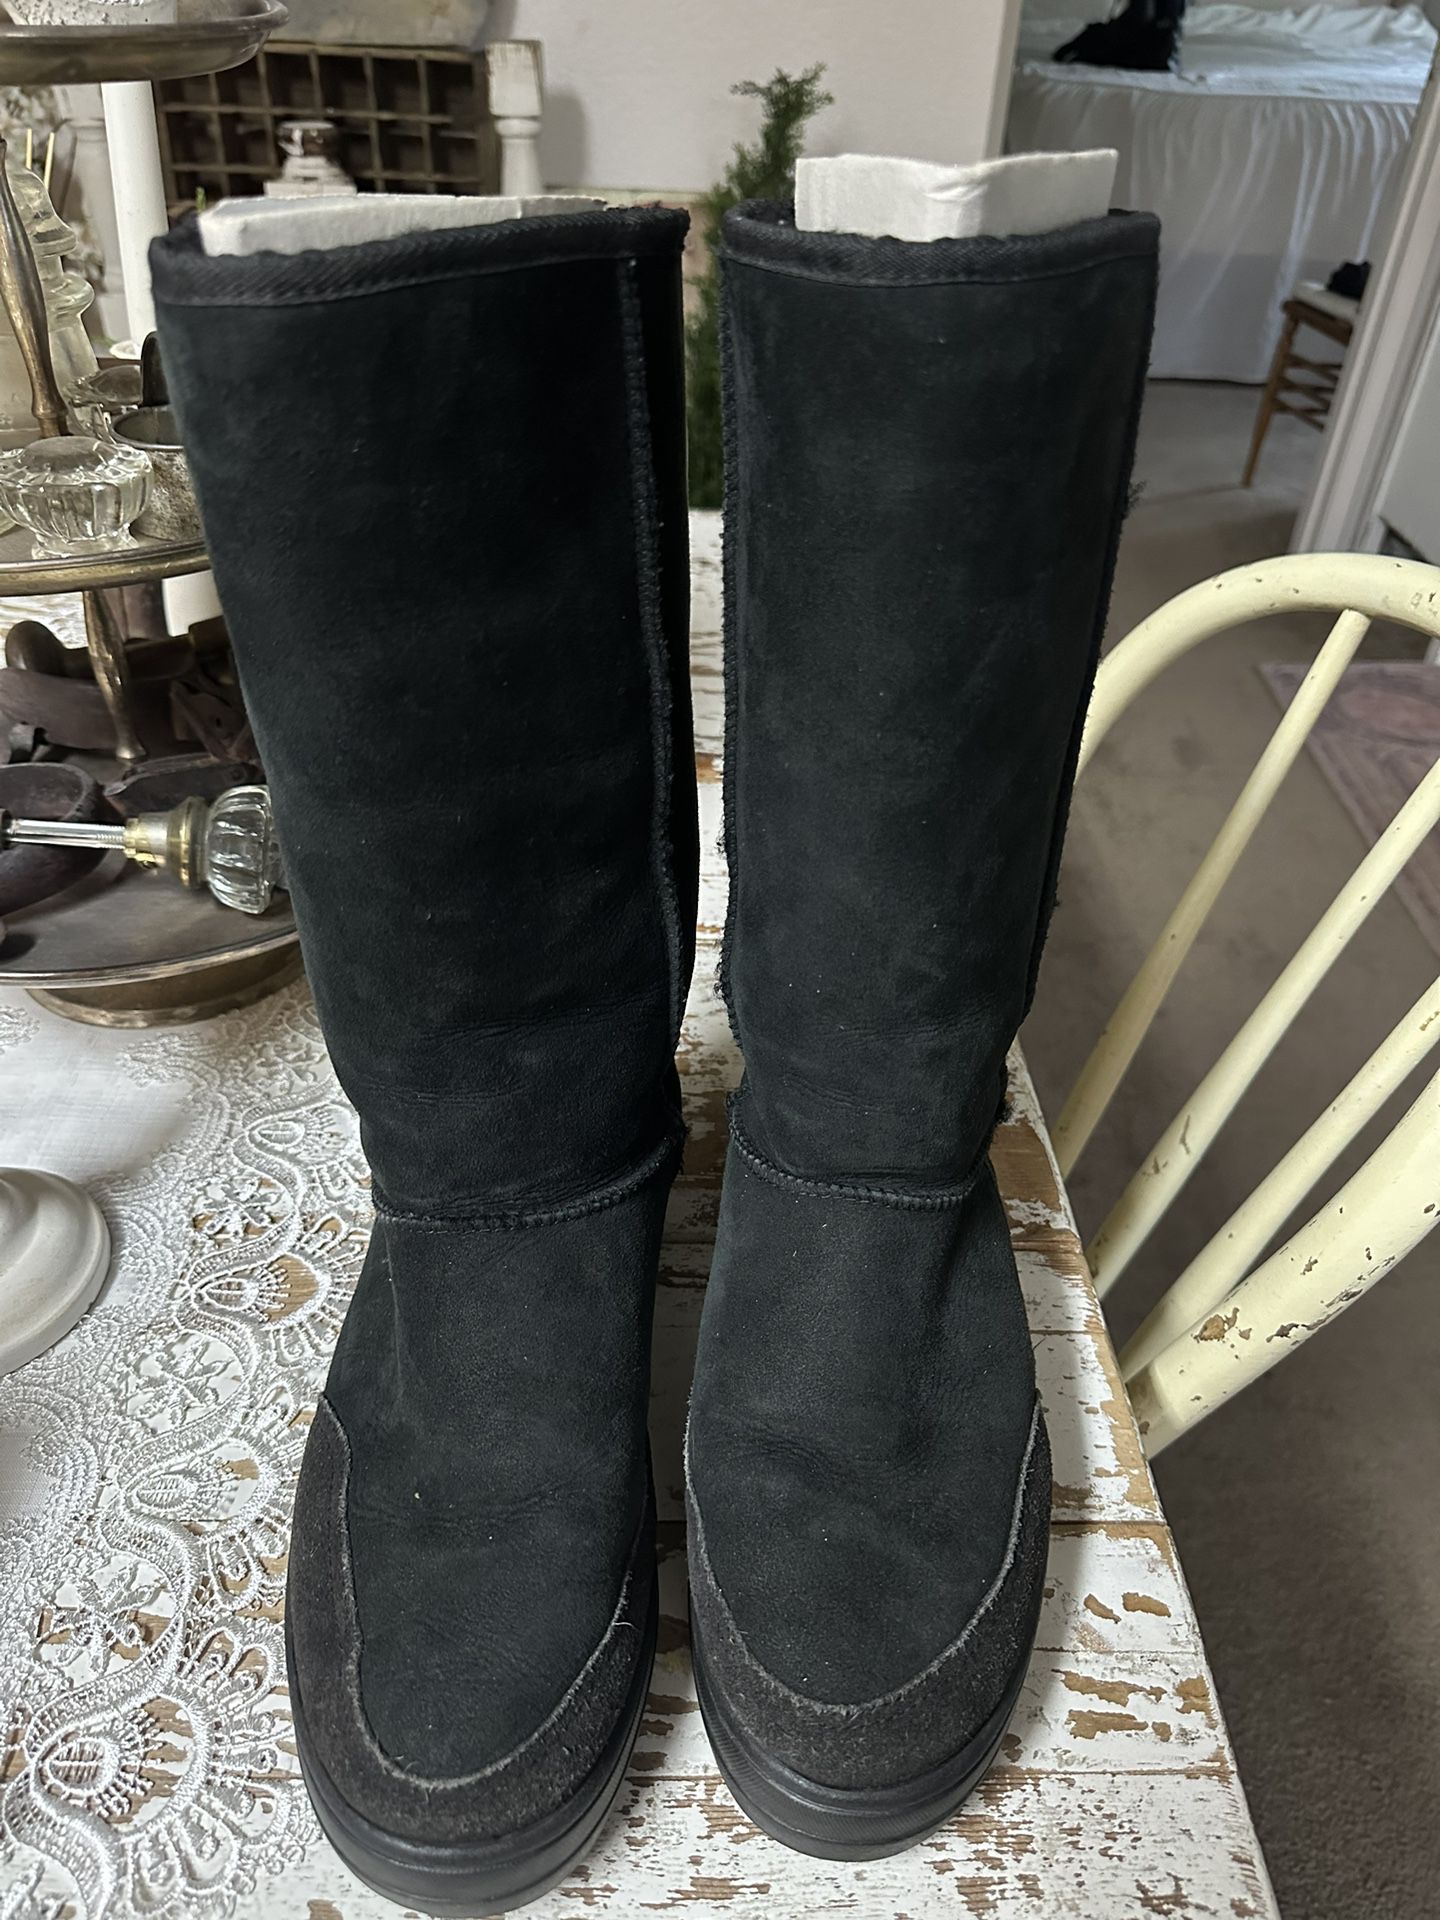 Tall Black Uggs With The Stripe Up The Back Size 9 